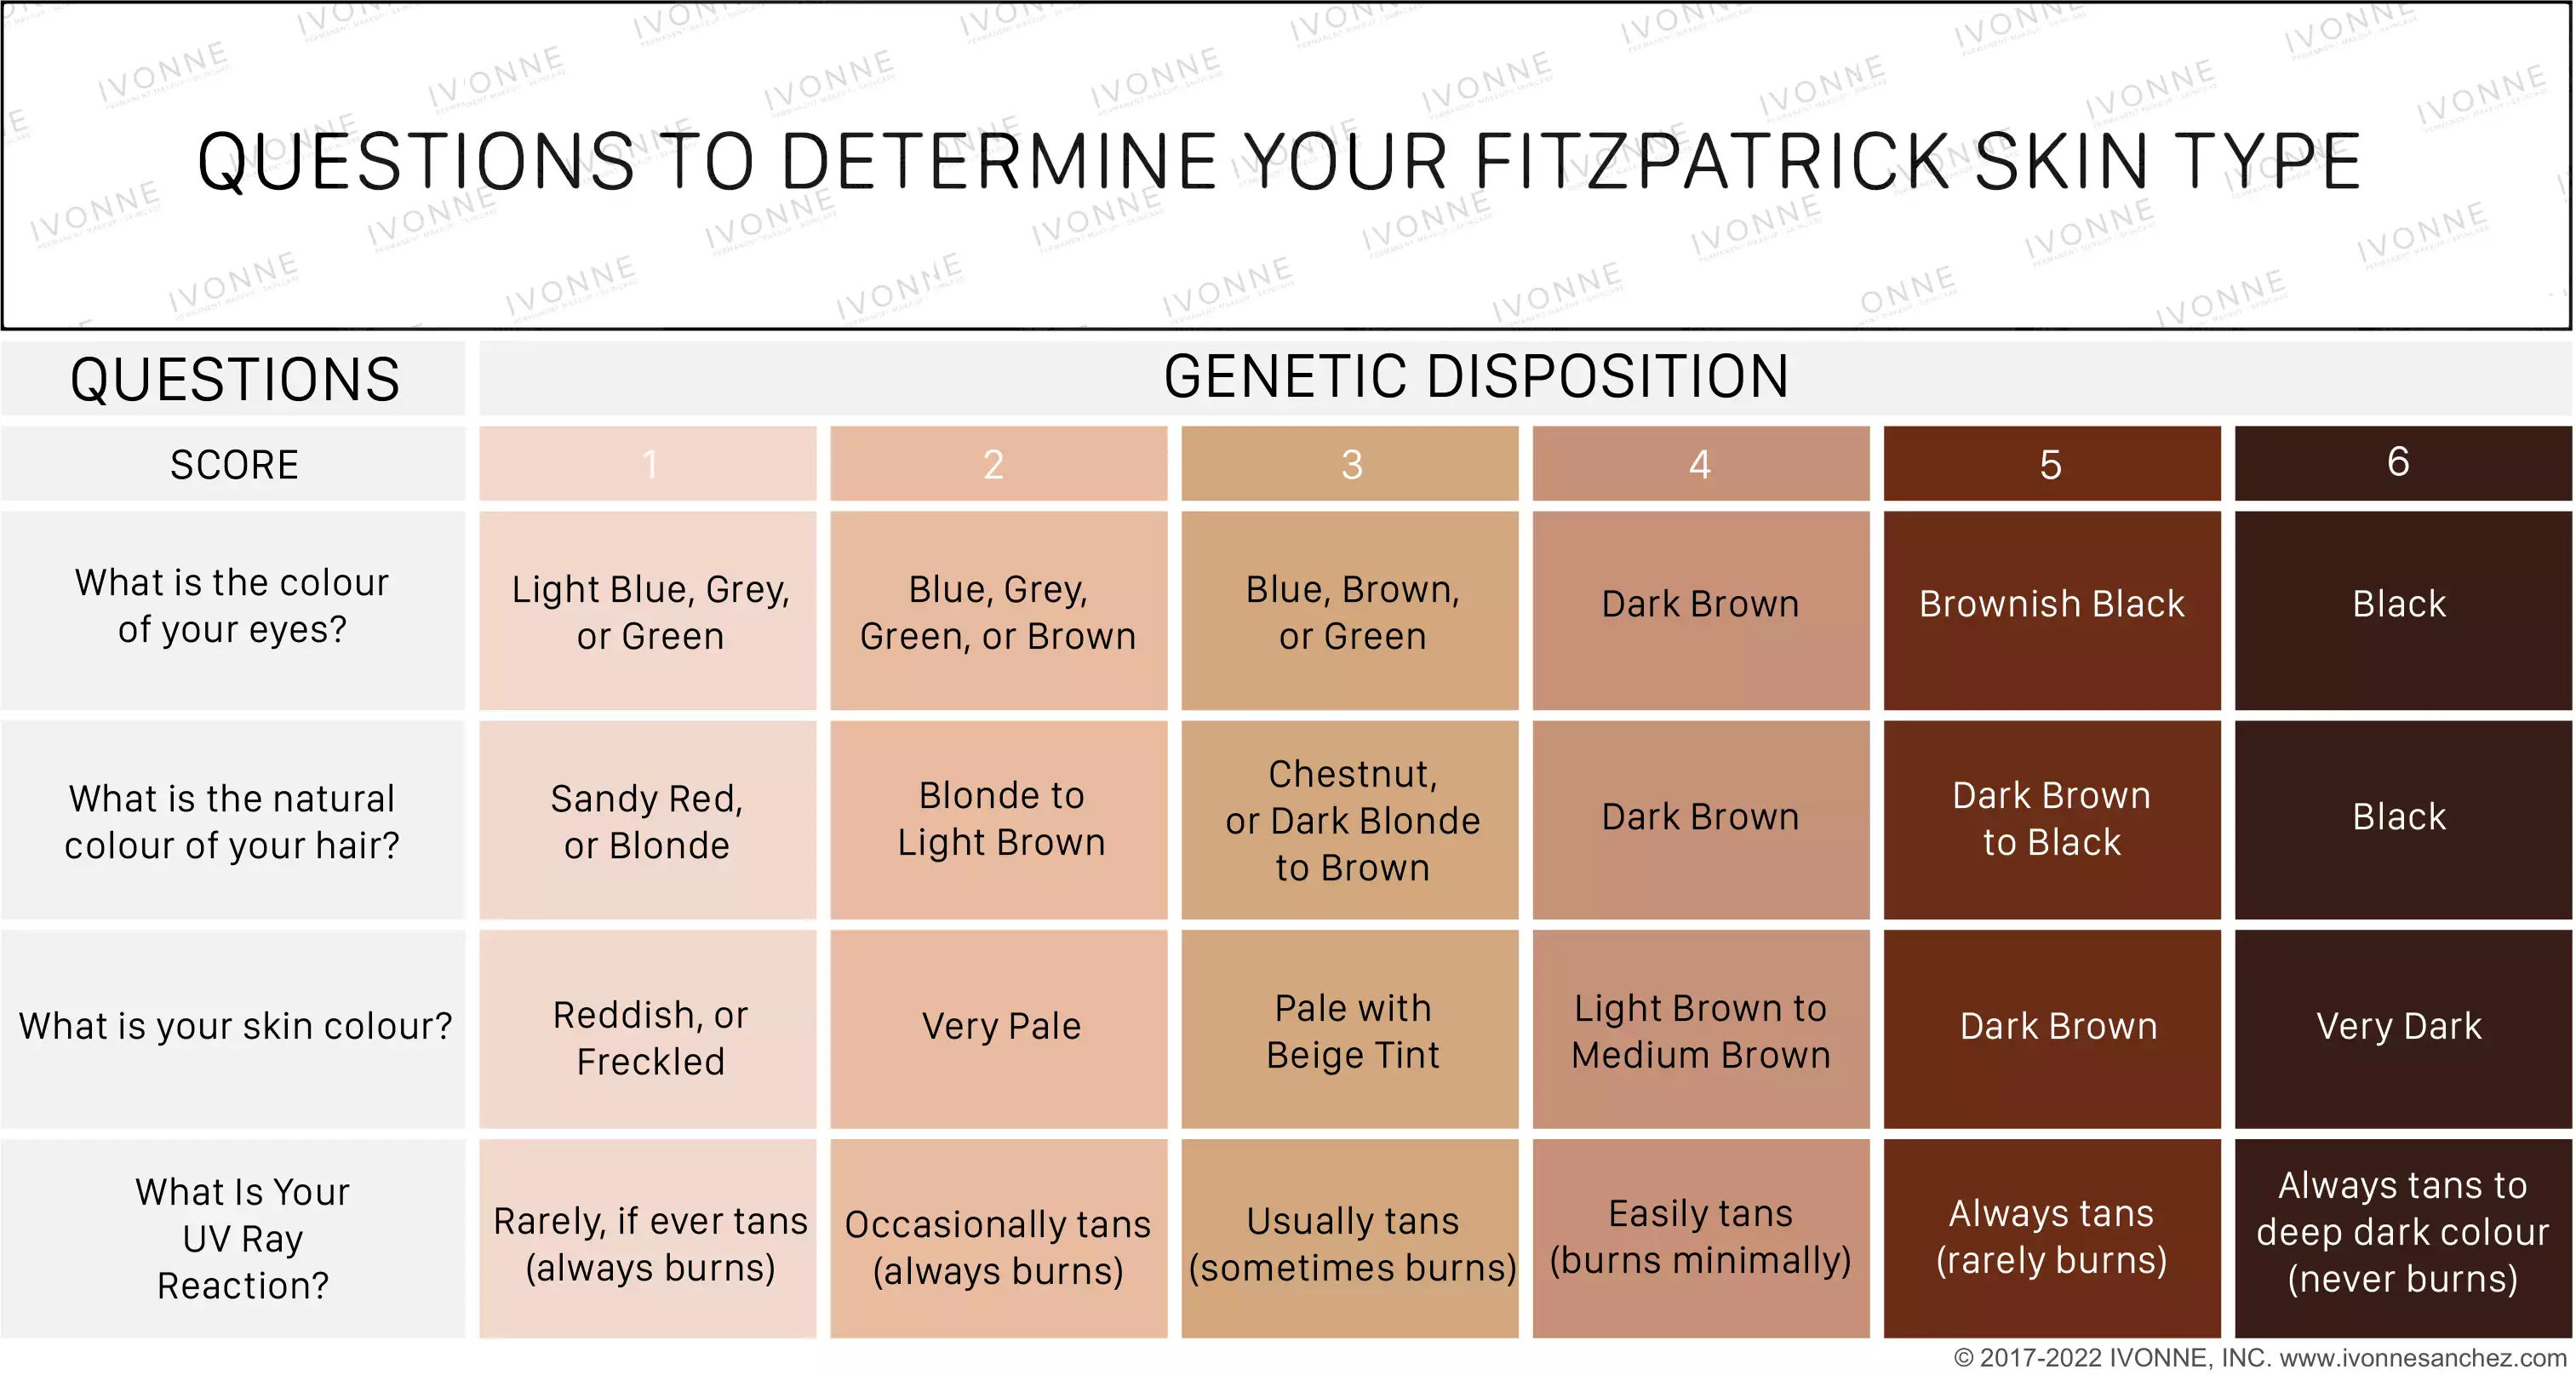 How To Determine Your Fitzpatrick Skin Type Chart at IVONNE